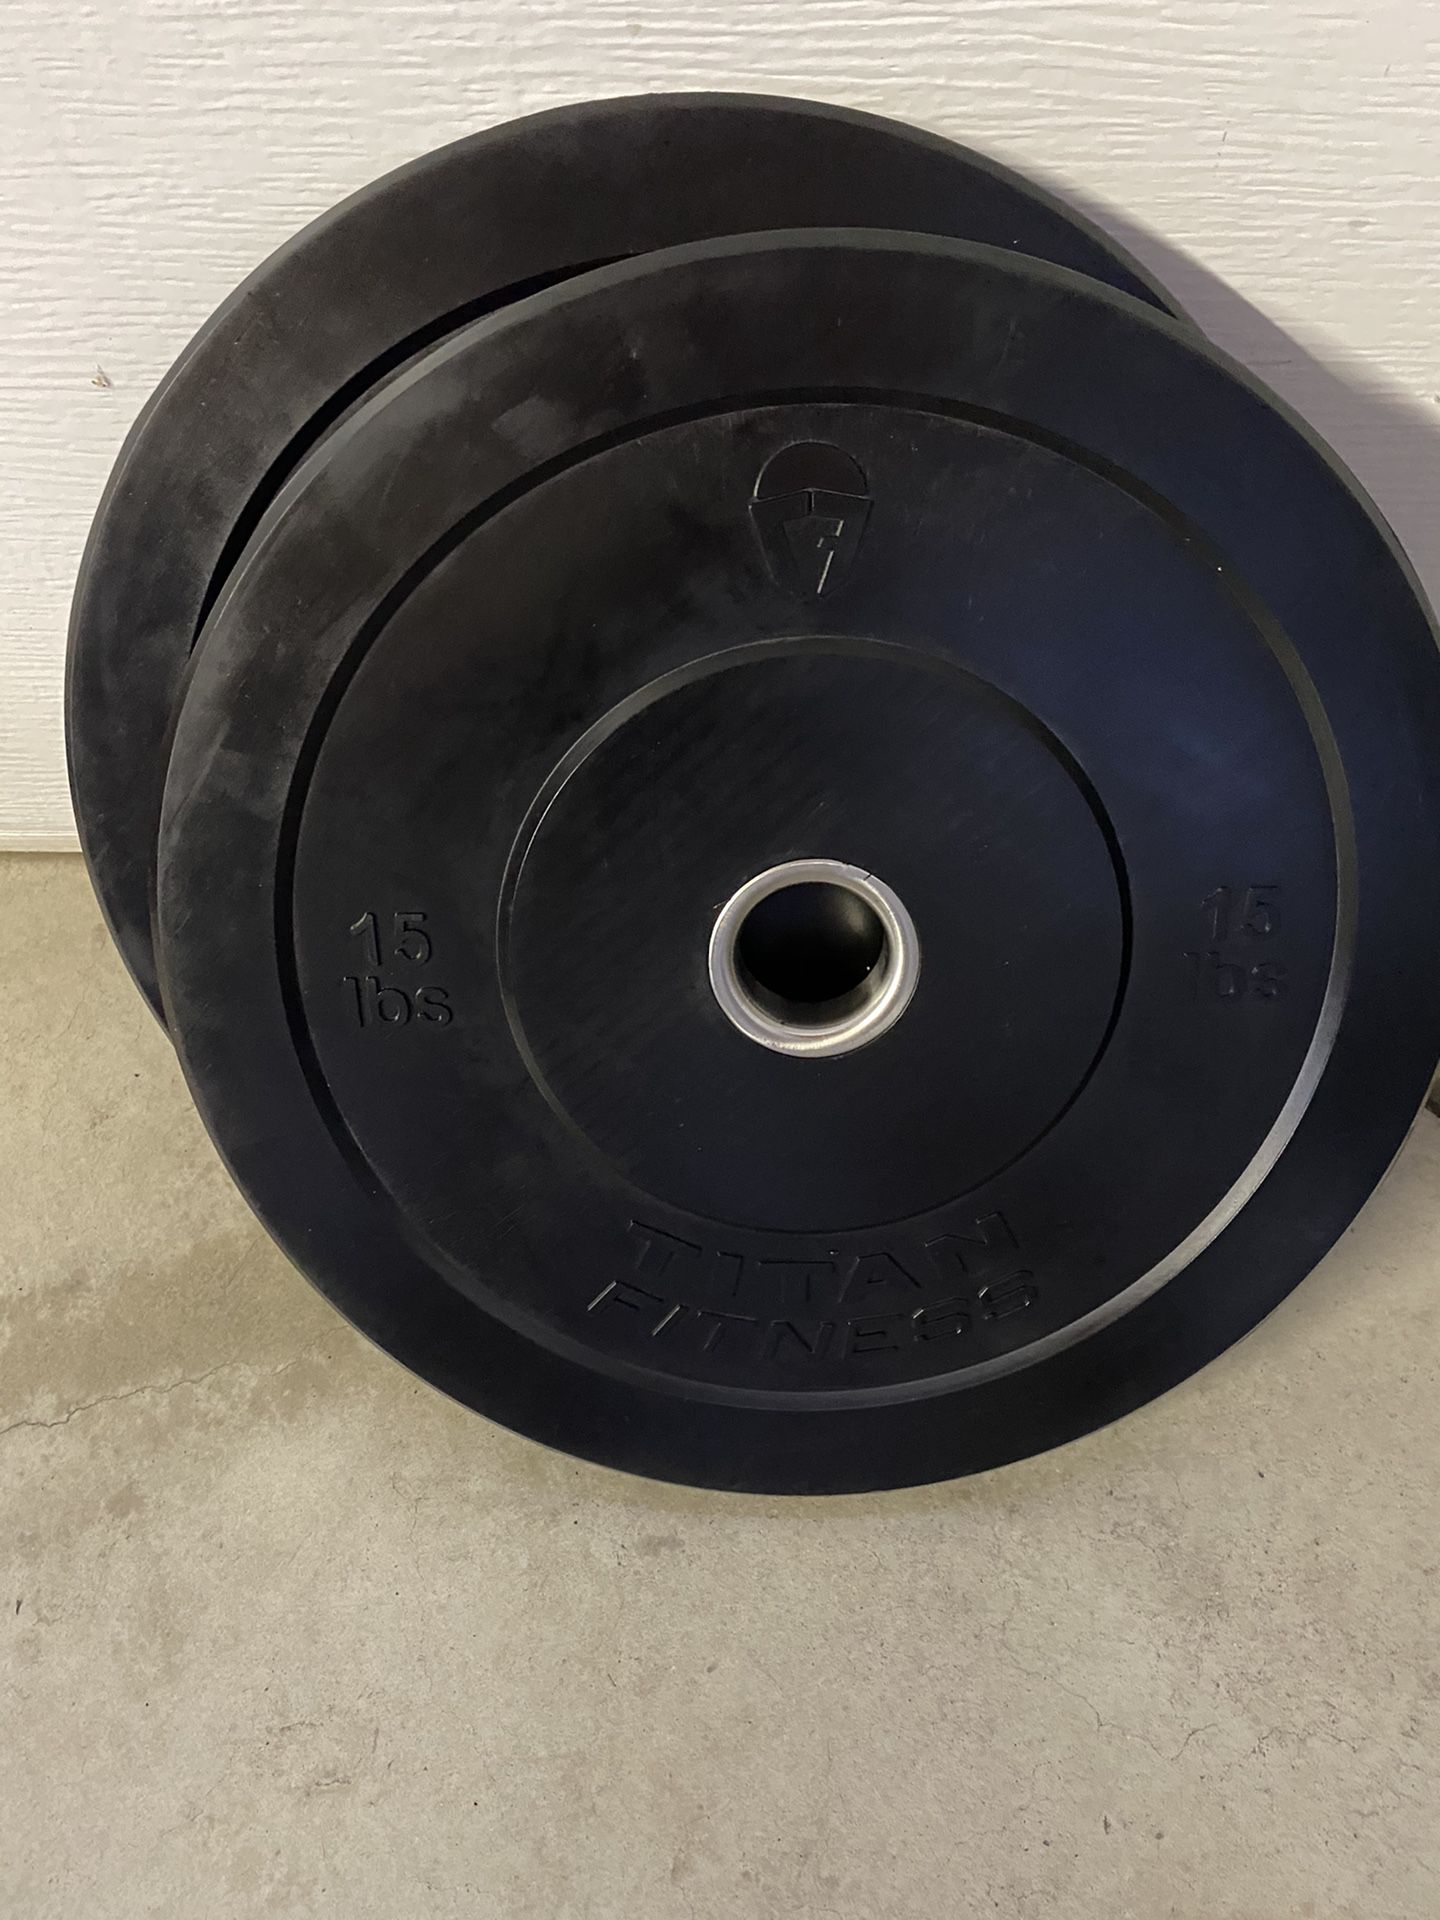 Bumper plates olympic plates weights